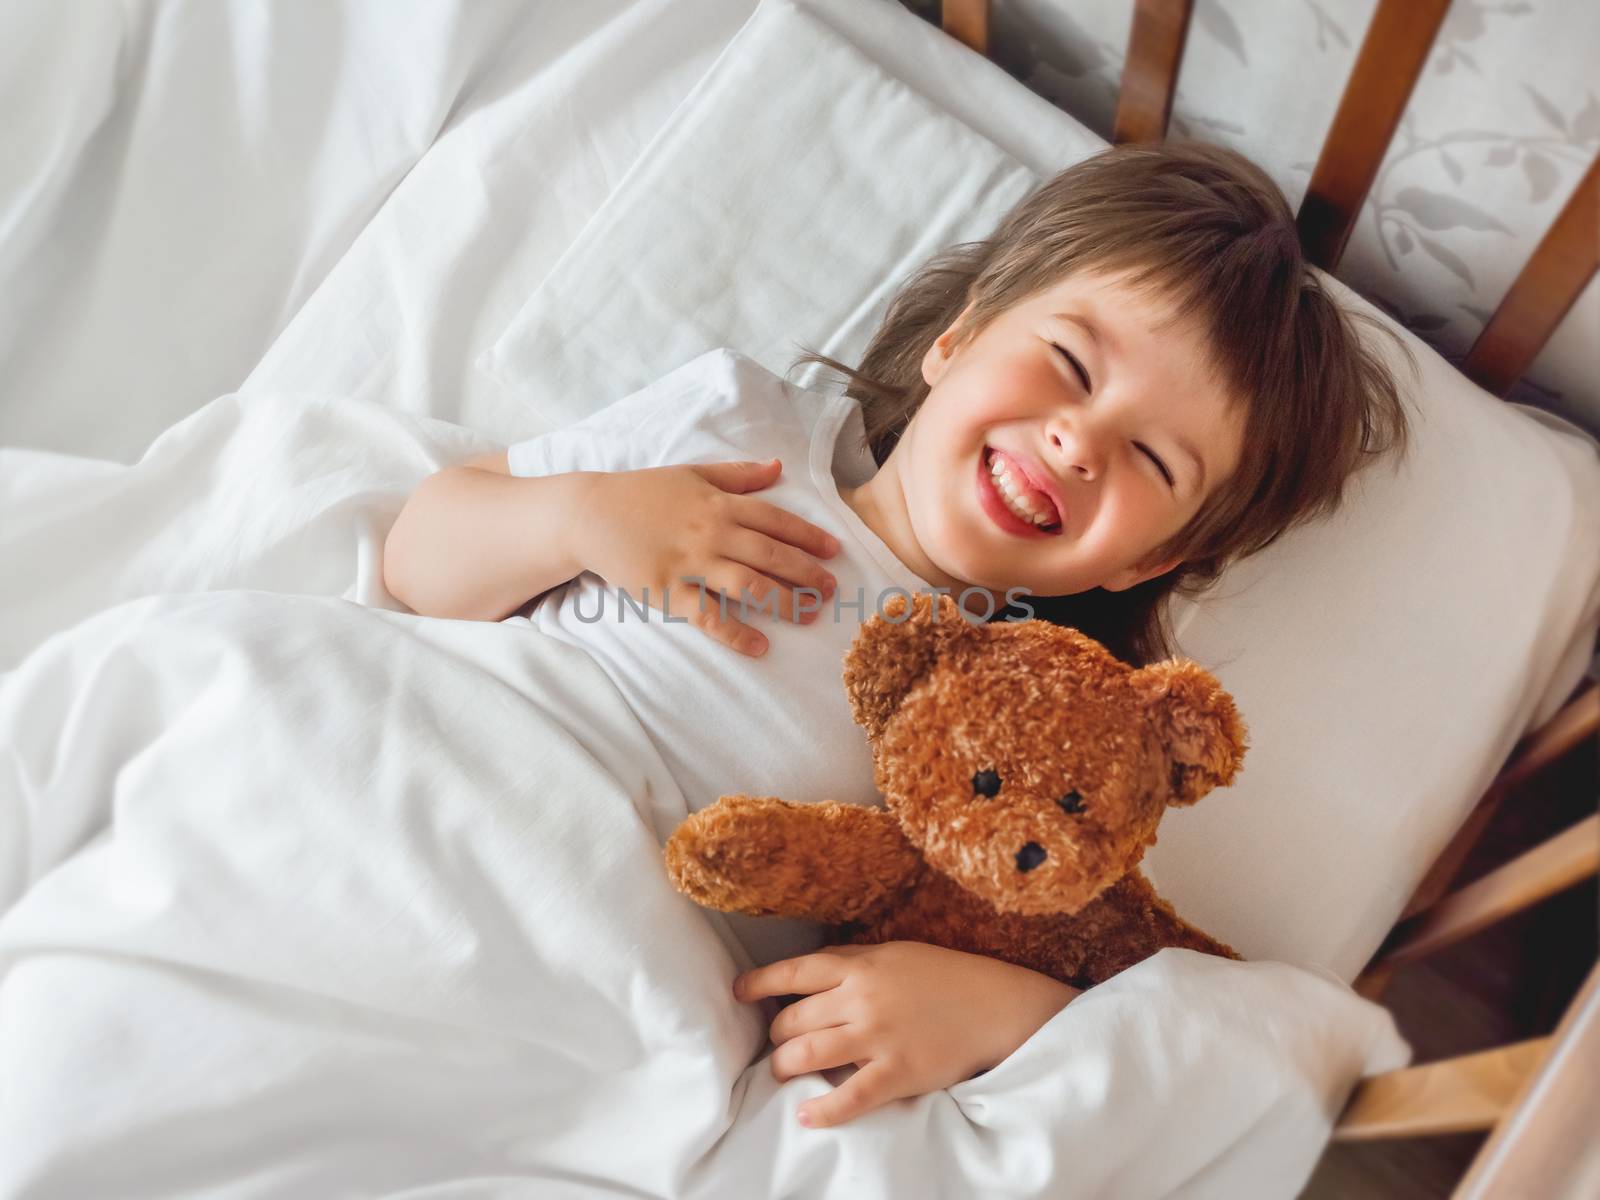 Toddler lies in bed with cute teddy bear. Little boy under white blanket with fluffy toy. Plush guard watches out child's sleep. Morning bedtime at cozy home.